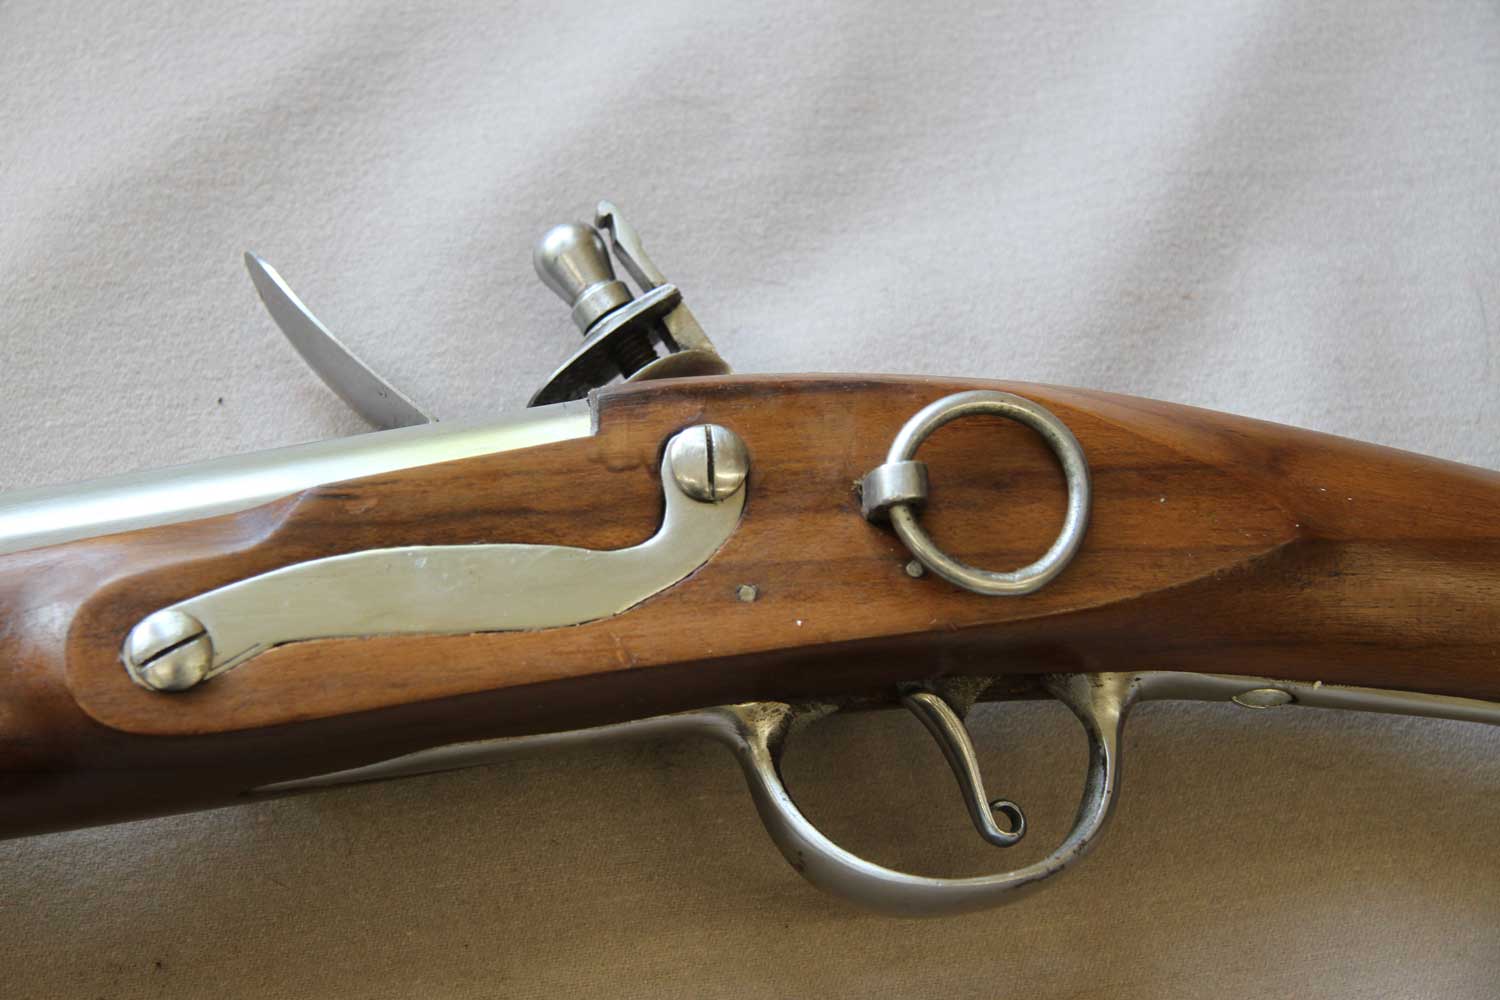 French, 1728 Infantry Musket